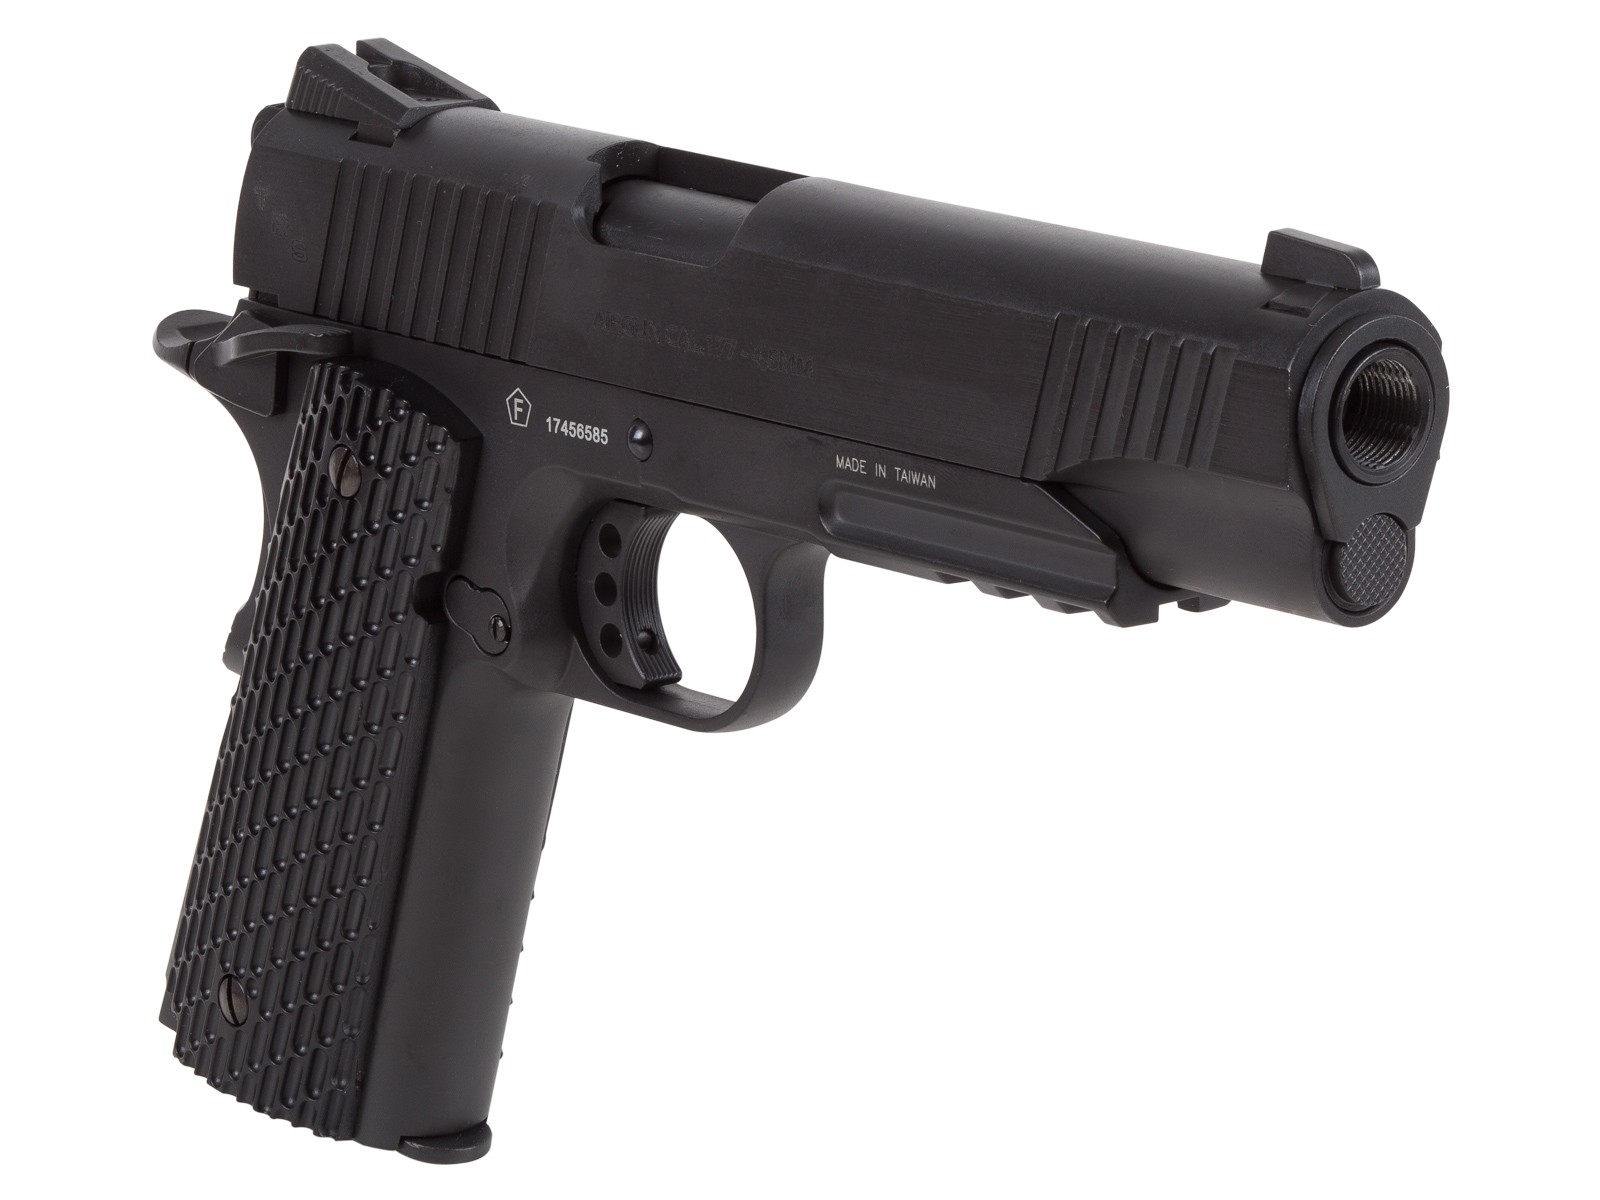 Swiss Arms 1911 Tactical CO2 Pistol Review